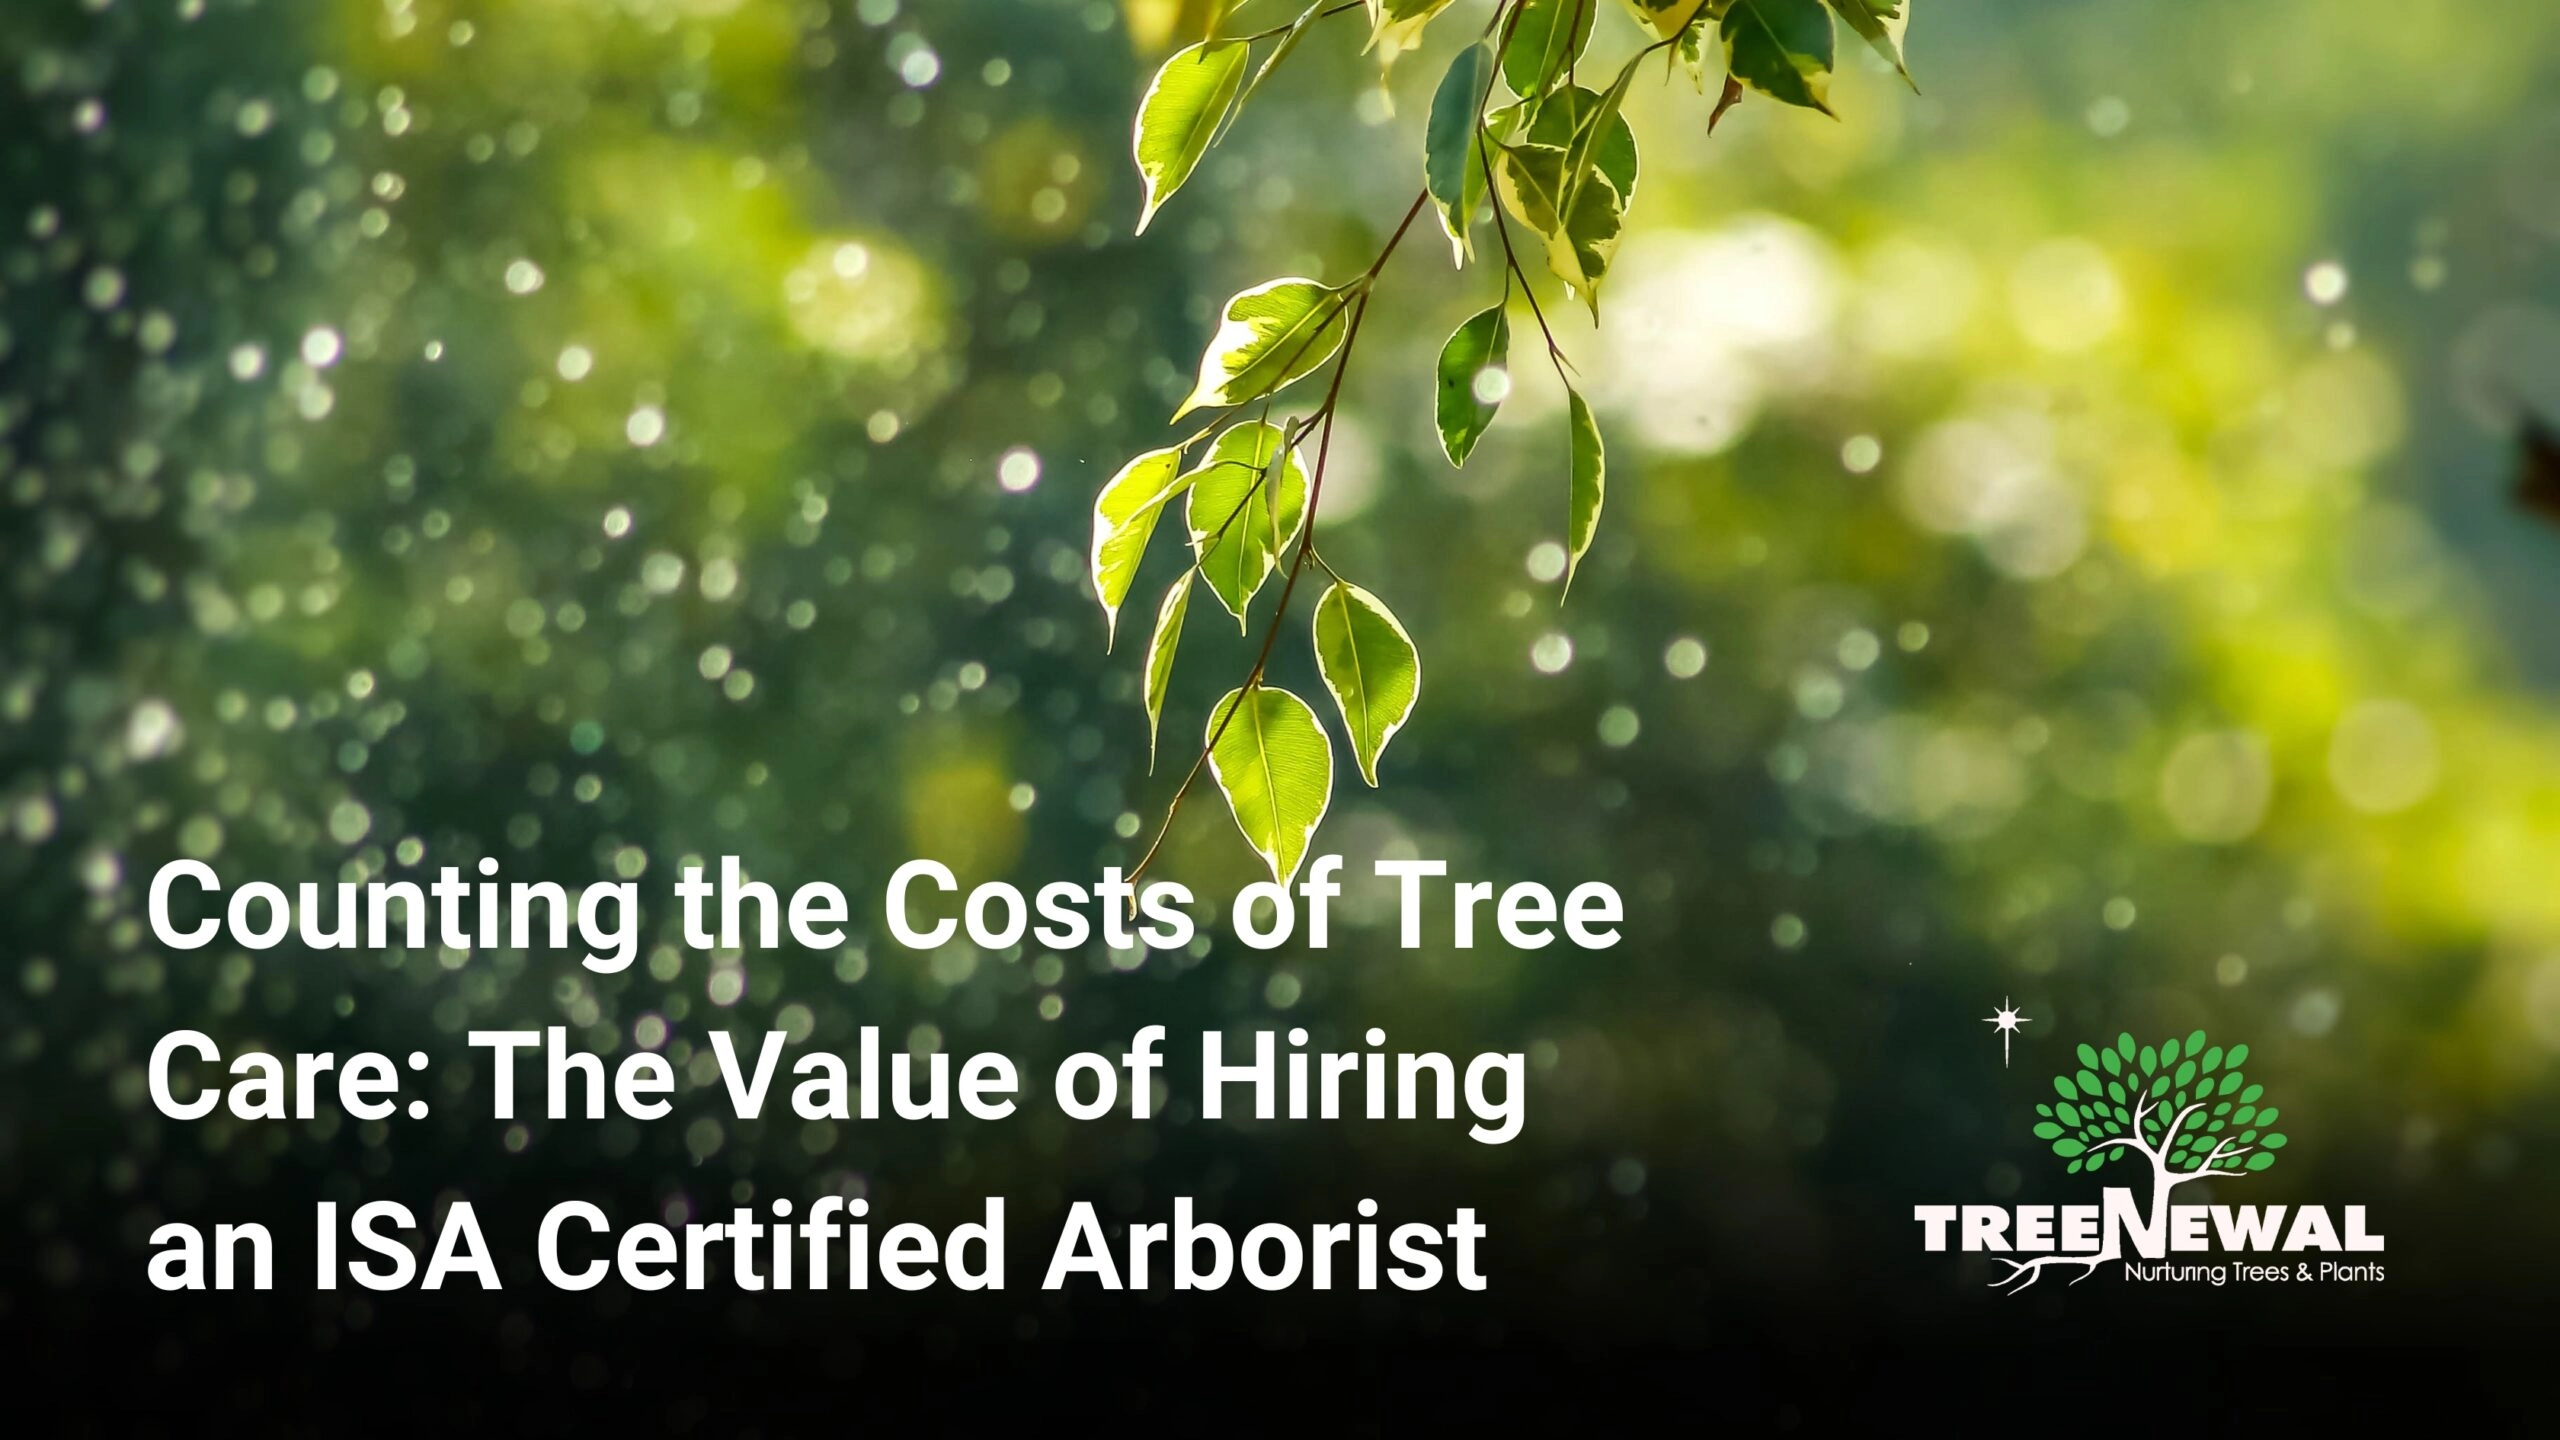 Counting the Costs of Tree Care: The Value of Hiring an ISA Certified Arborist